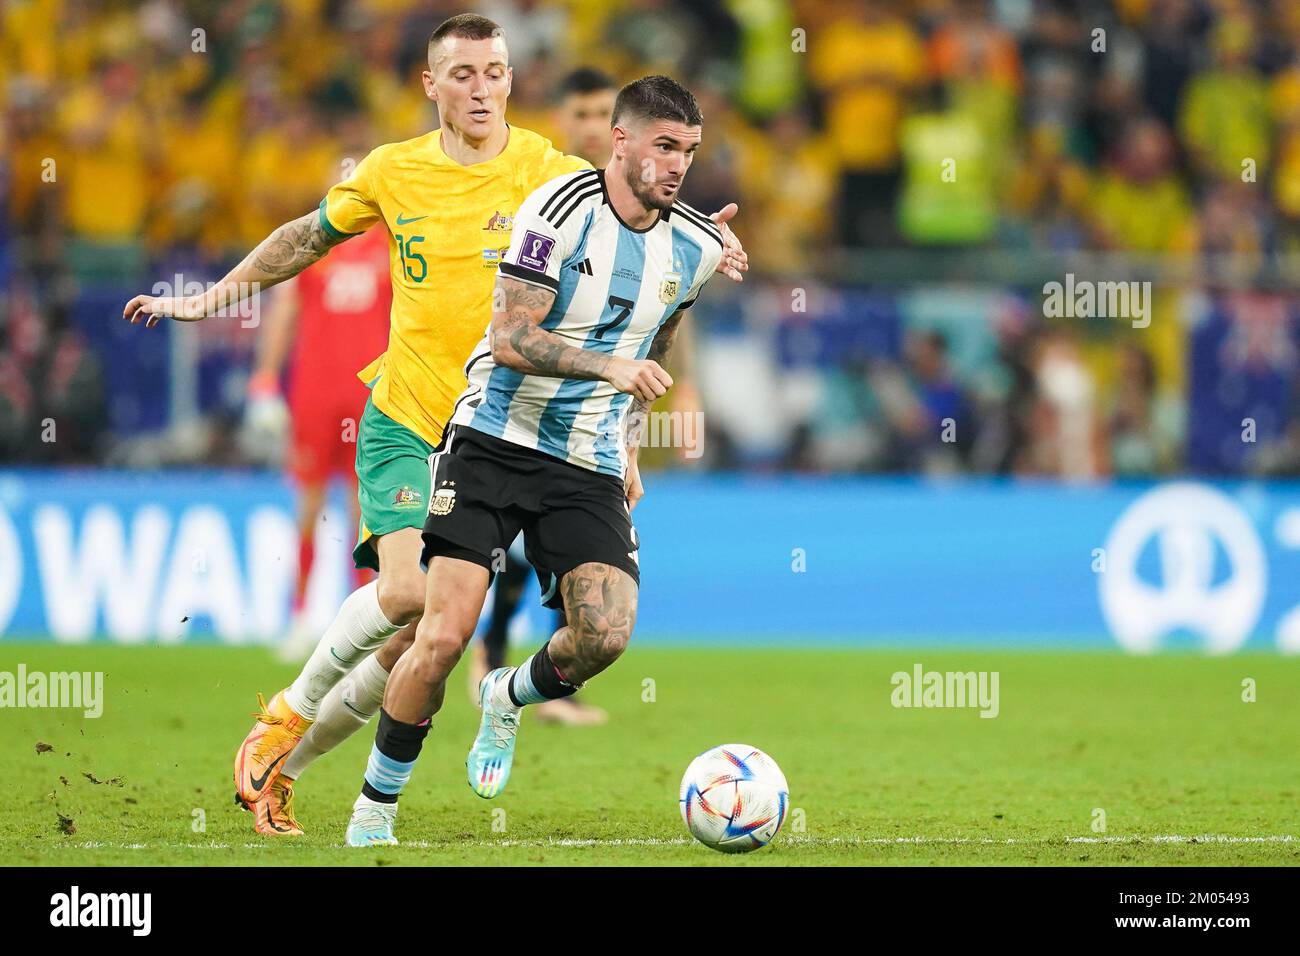 DOHA, QATAR - DECEMBER 3: Player of Argentina  Rodrigo De Paul fights for the ball with player of Australia Mitchell Duke during the FIFA World Cup Qatar 2022 Round of 16 match between Argentina and Australia at Ahmad bin Ali Stadium on December 3, 2022 in Al Rayyan, Qatar. (Photo by Florencia Tan Jun/PxImages) Stock Photo